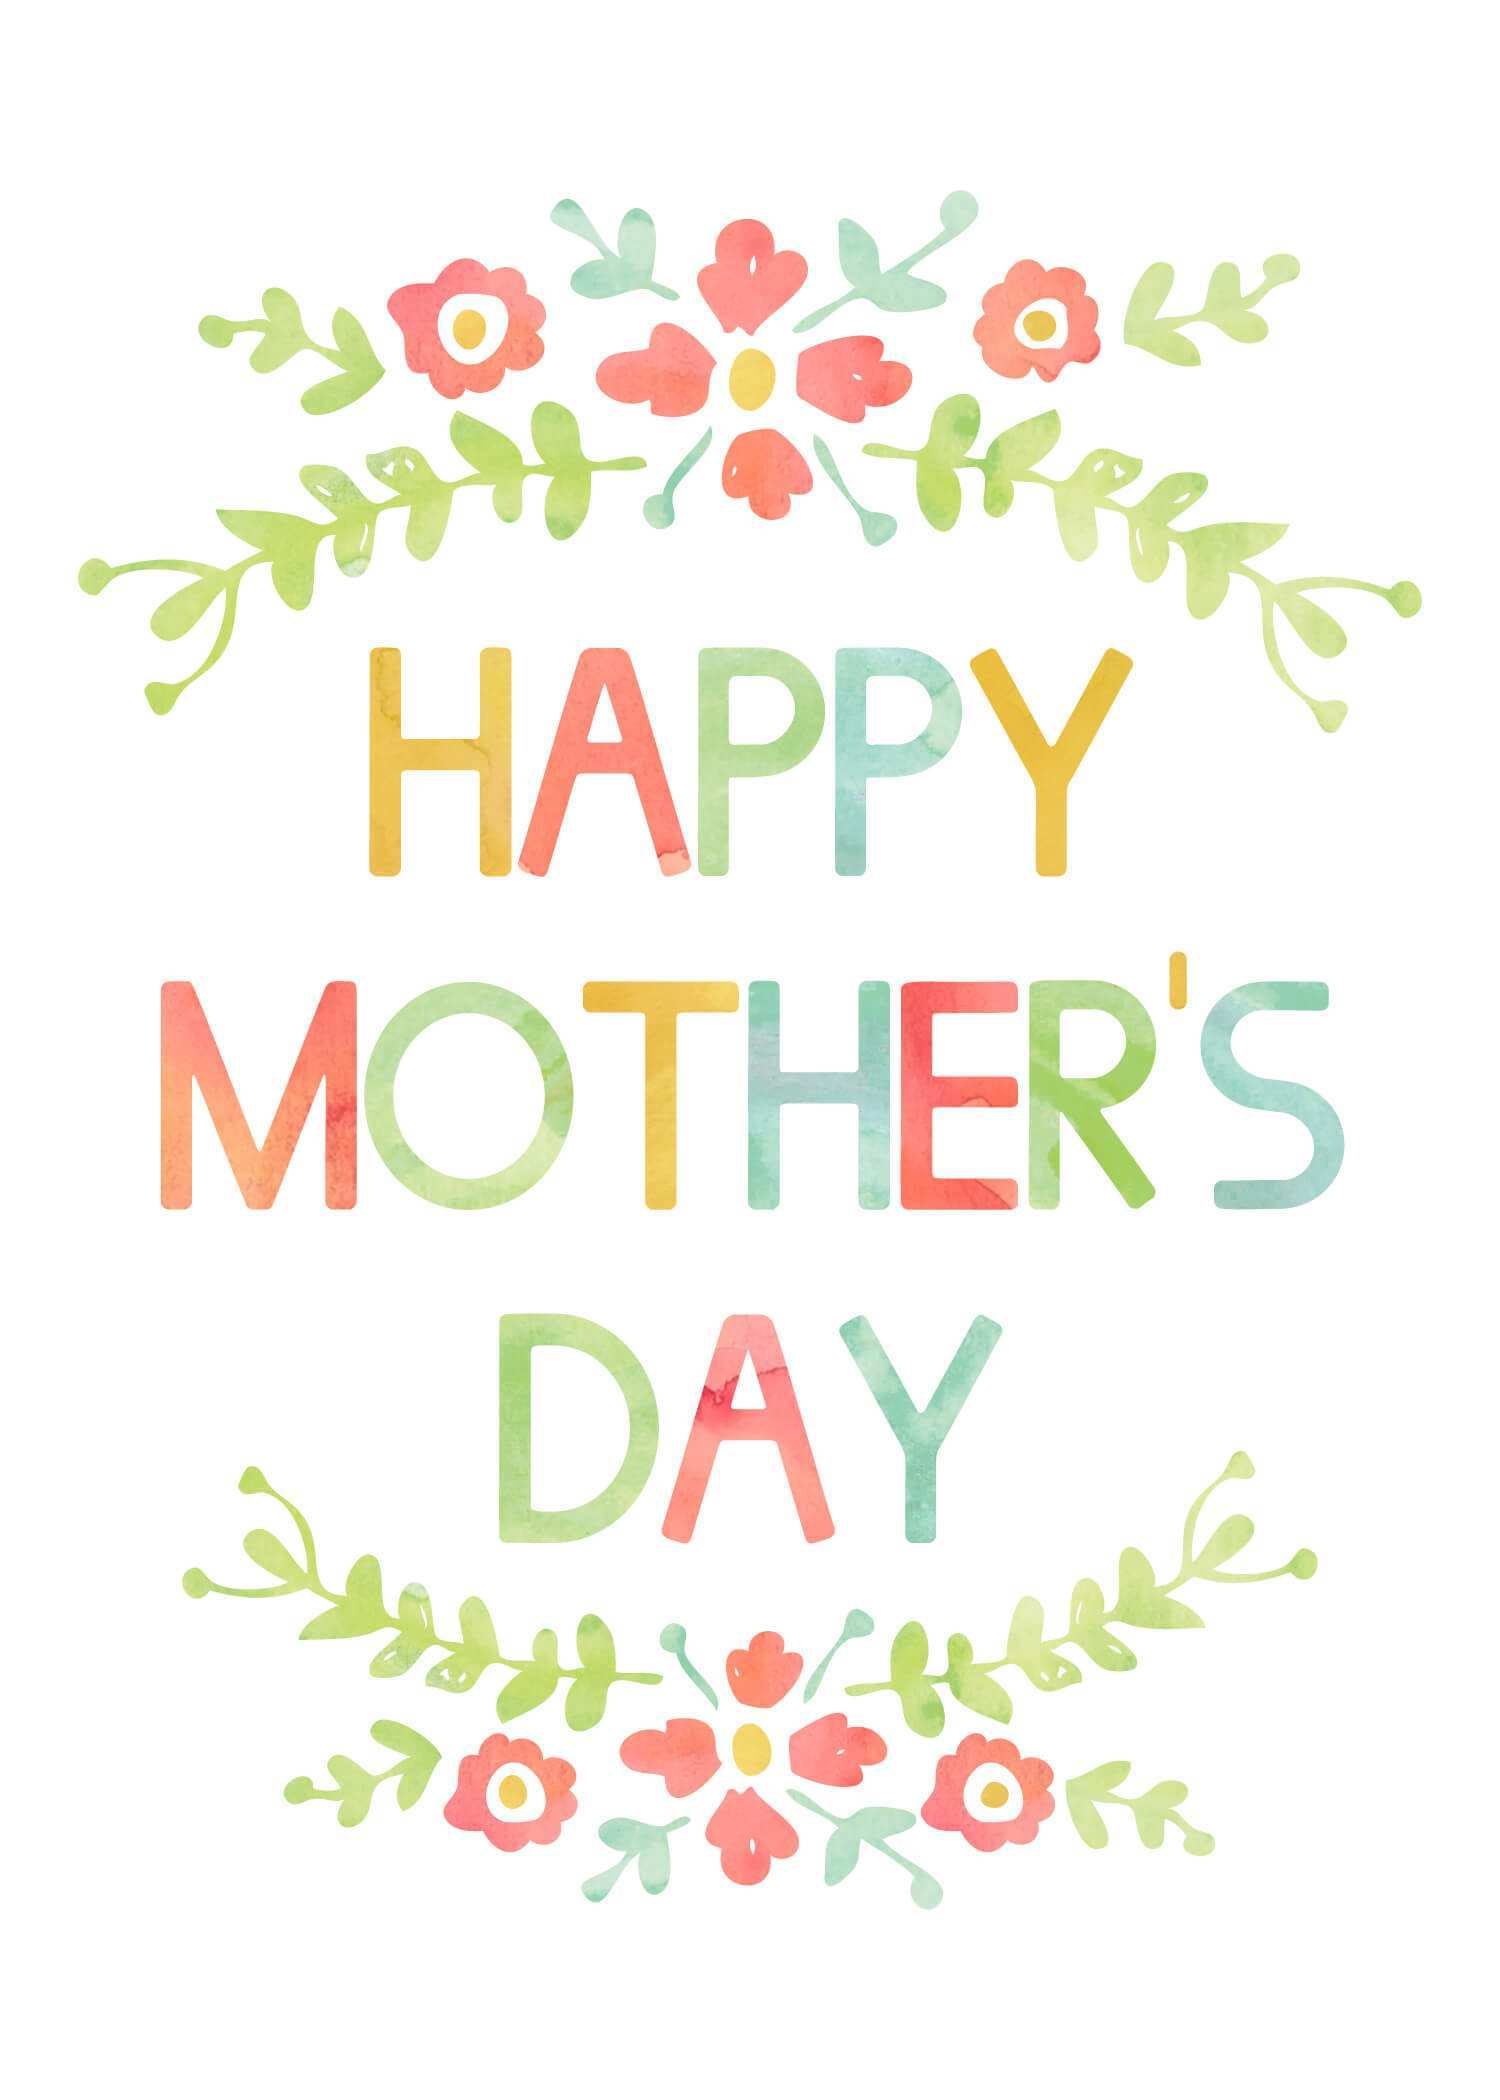 66 Format Happy Mothers Day Card Template Free in Word with Happy Mothers Day Card Template Free